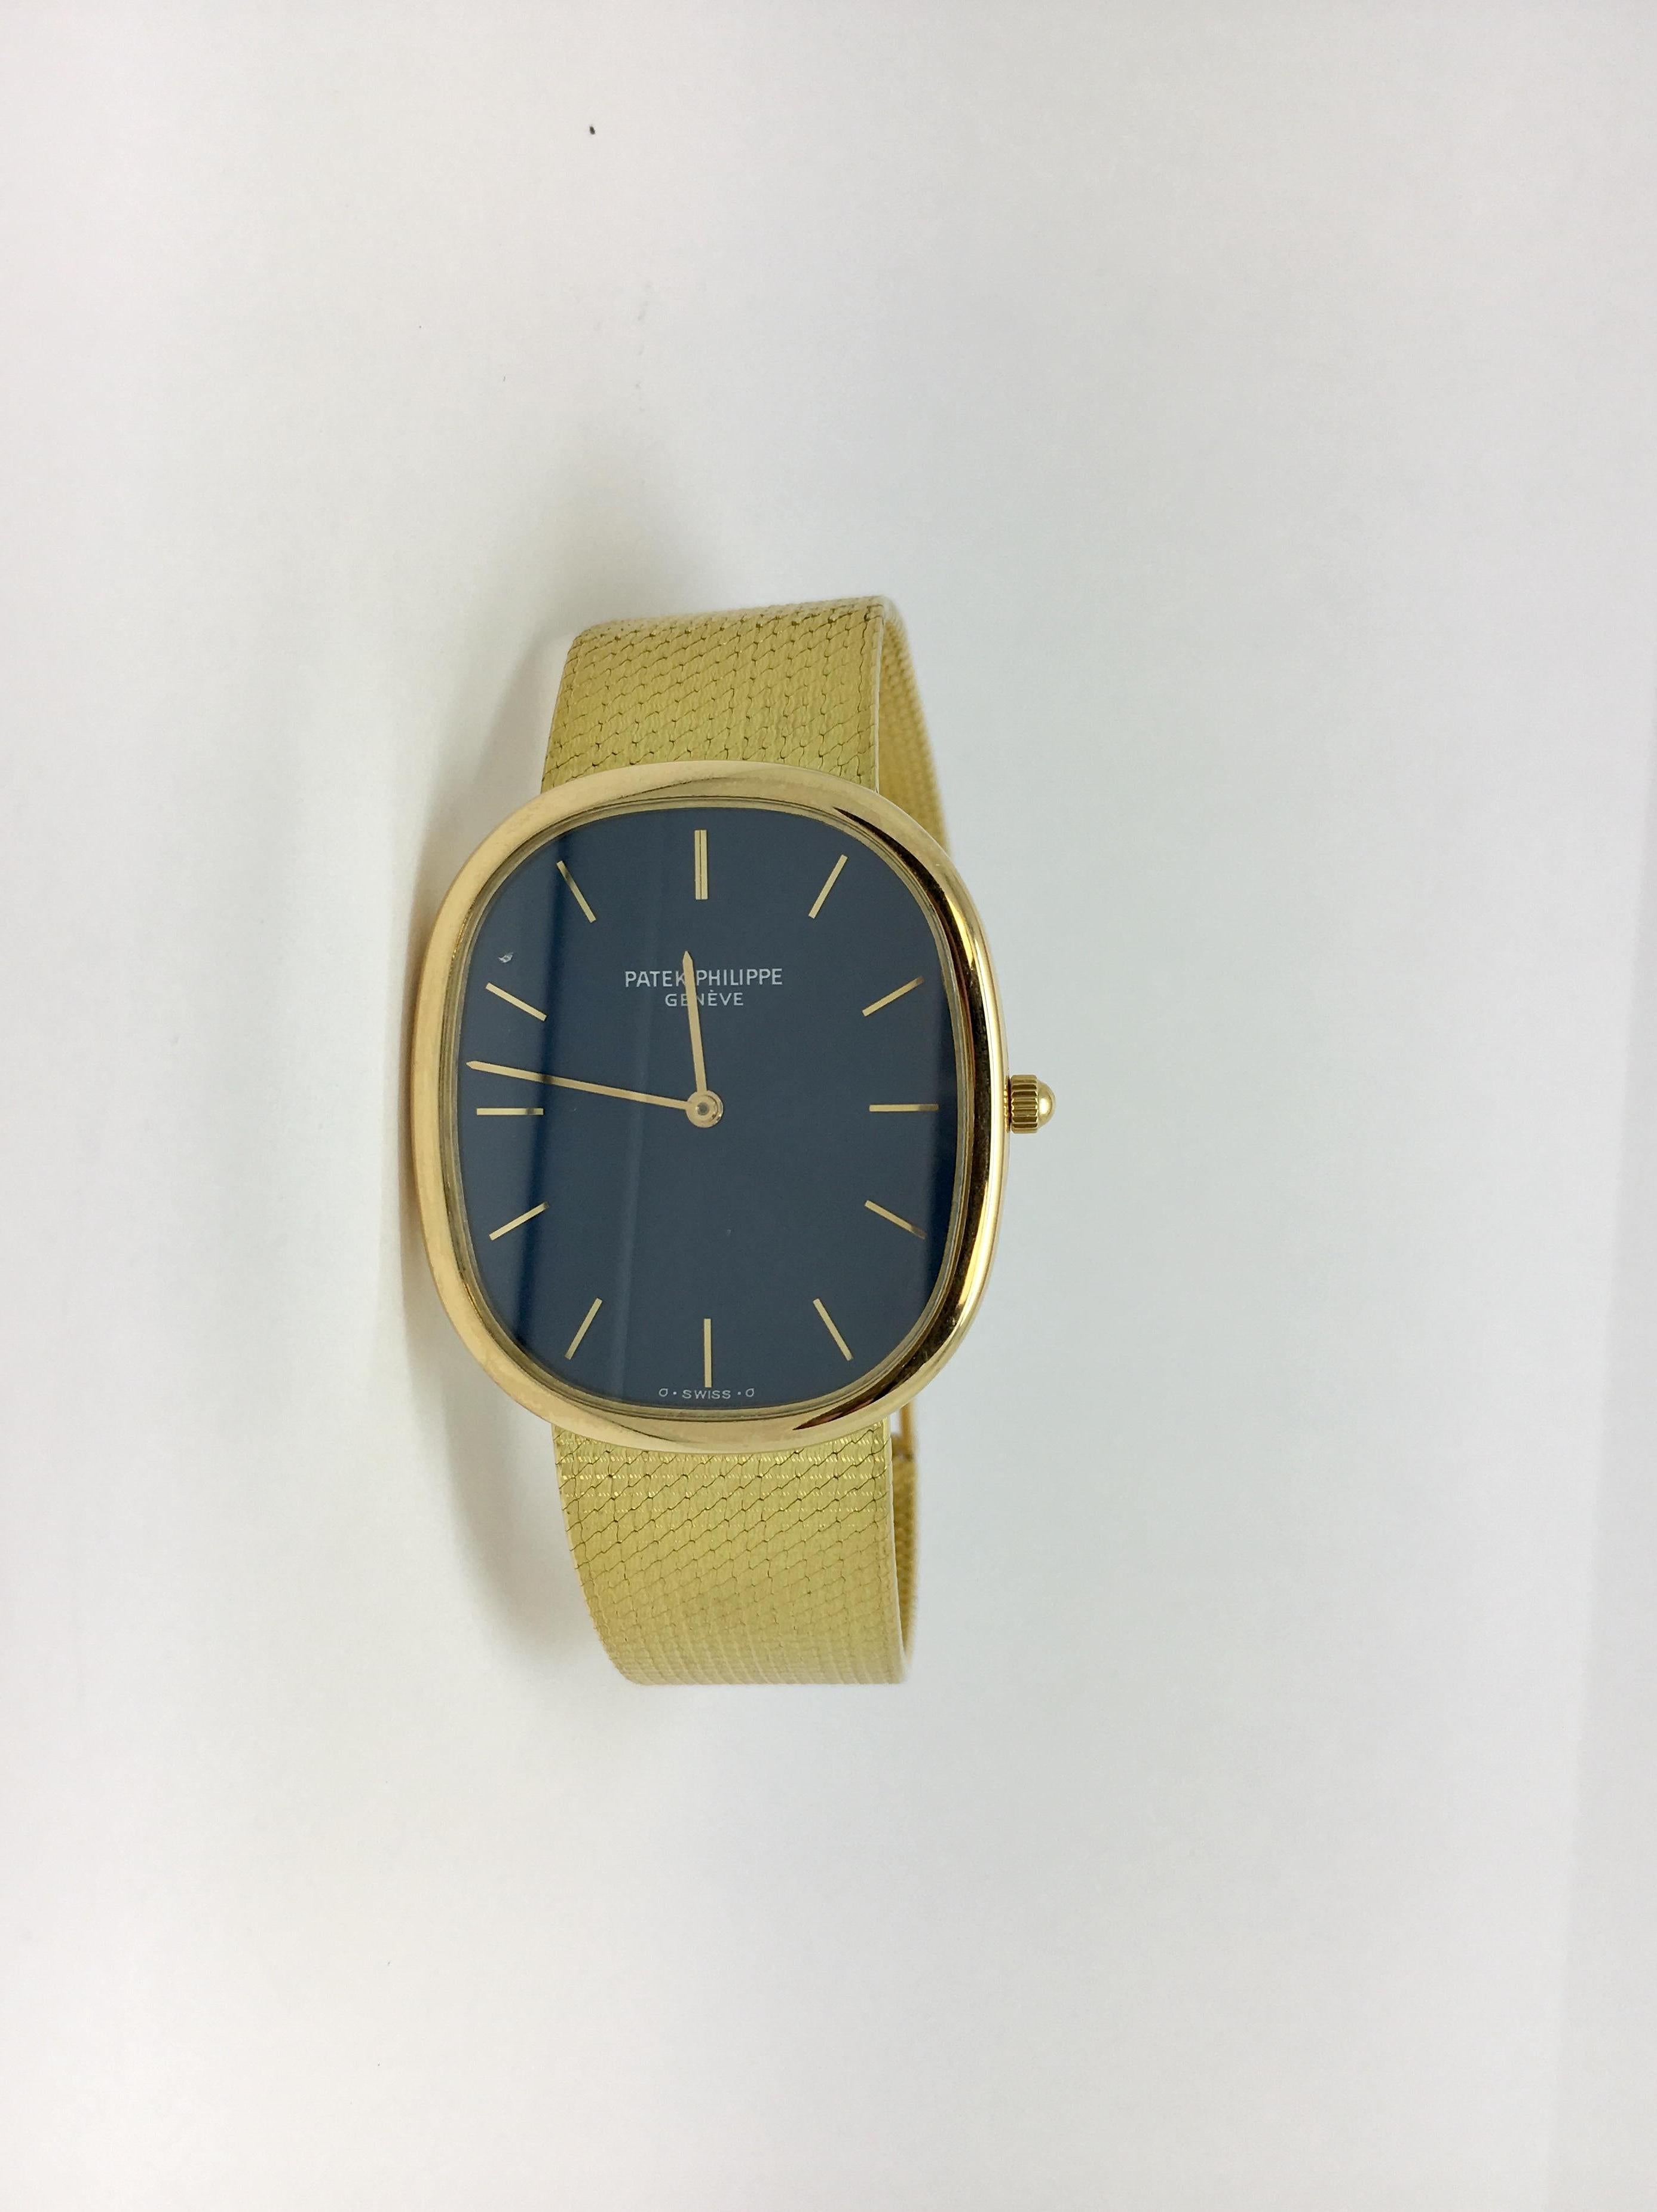 One pre-owned Patek Philippe Ellipse 30mm time piece 18 karat yellow gold. Model reference number 3738 The inside wrist approximate measurement 7 inches, approx weight 29 grams.  The bracelet clasp is stamped ITALY  18K  00750. Circa 1988